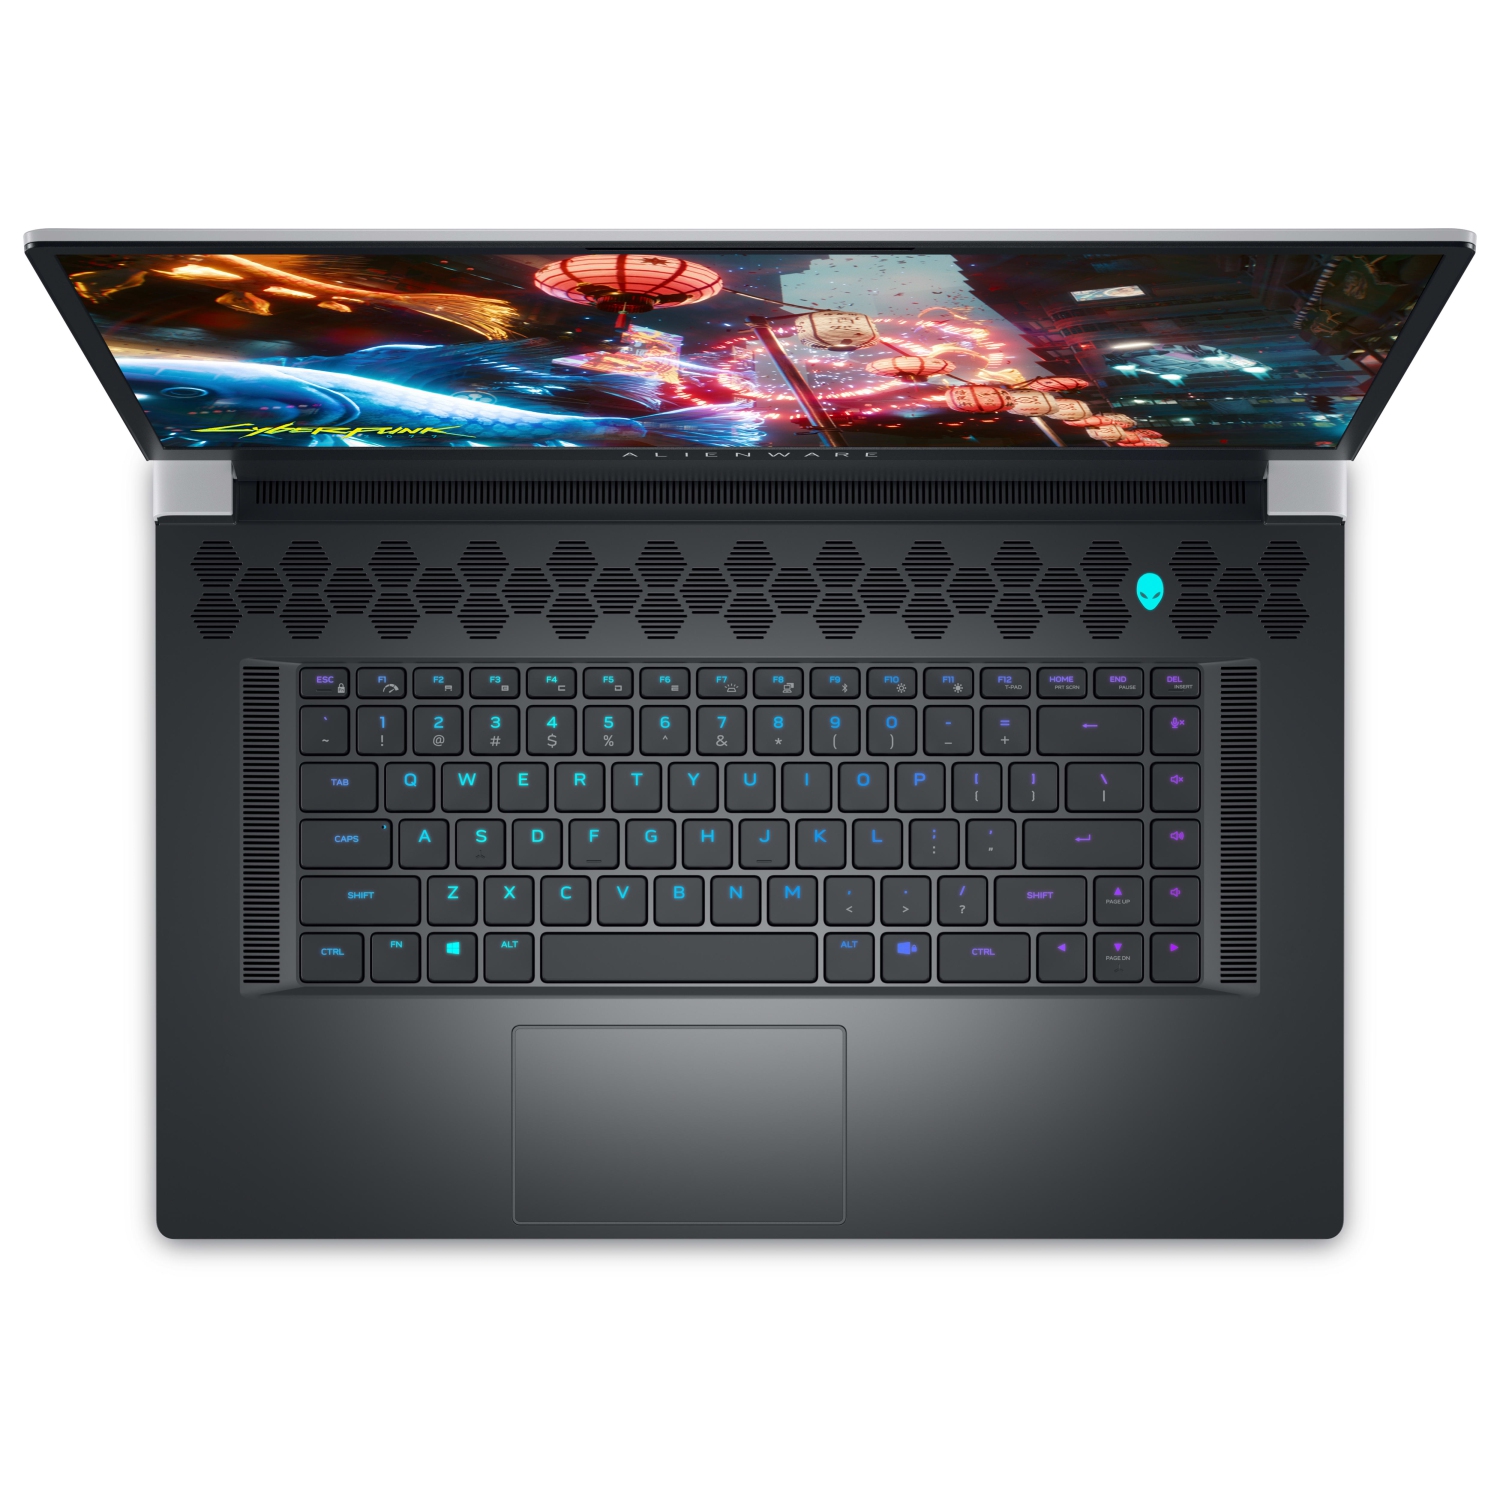 Refurbished (Excellent) – Dell Alienware X17 R2 Gaming Laptop (2022) | 17.3" FHD | Core i9 - 2TB SSD - 32GB RAM - 3080 Ti | 14 Cores @ 5 GHz - 12th Gen CPU - 12GB GDDR6X